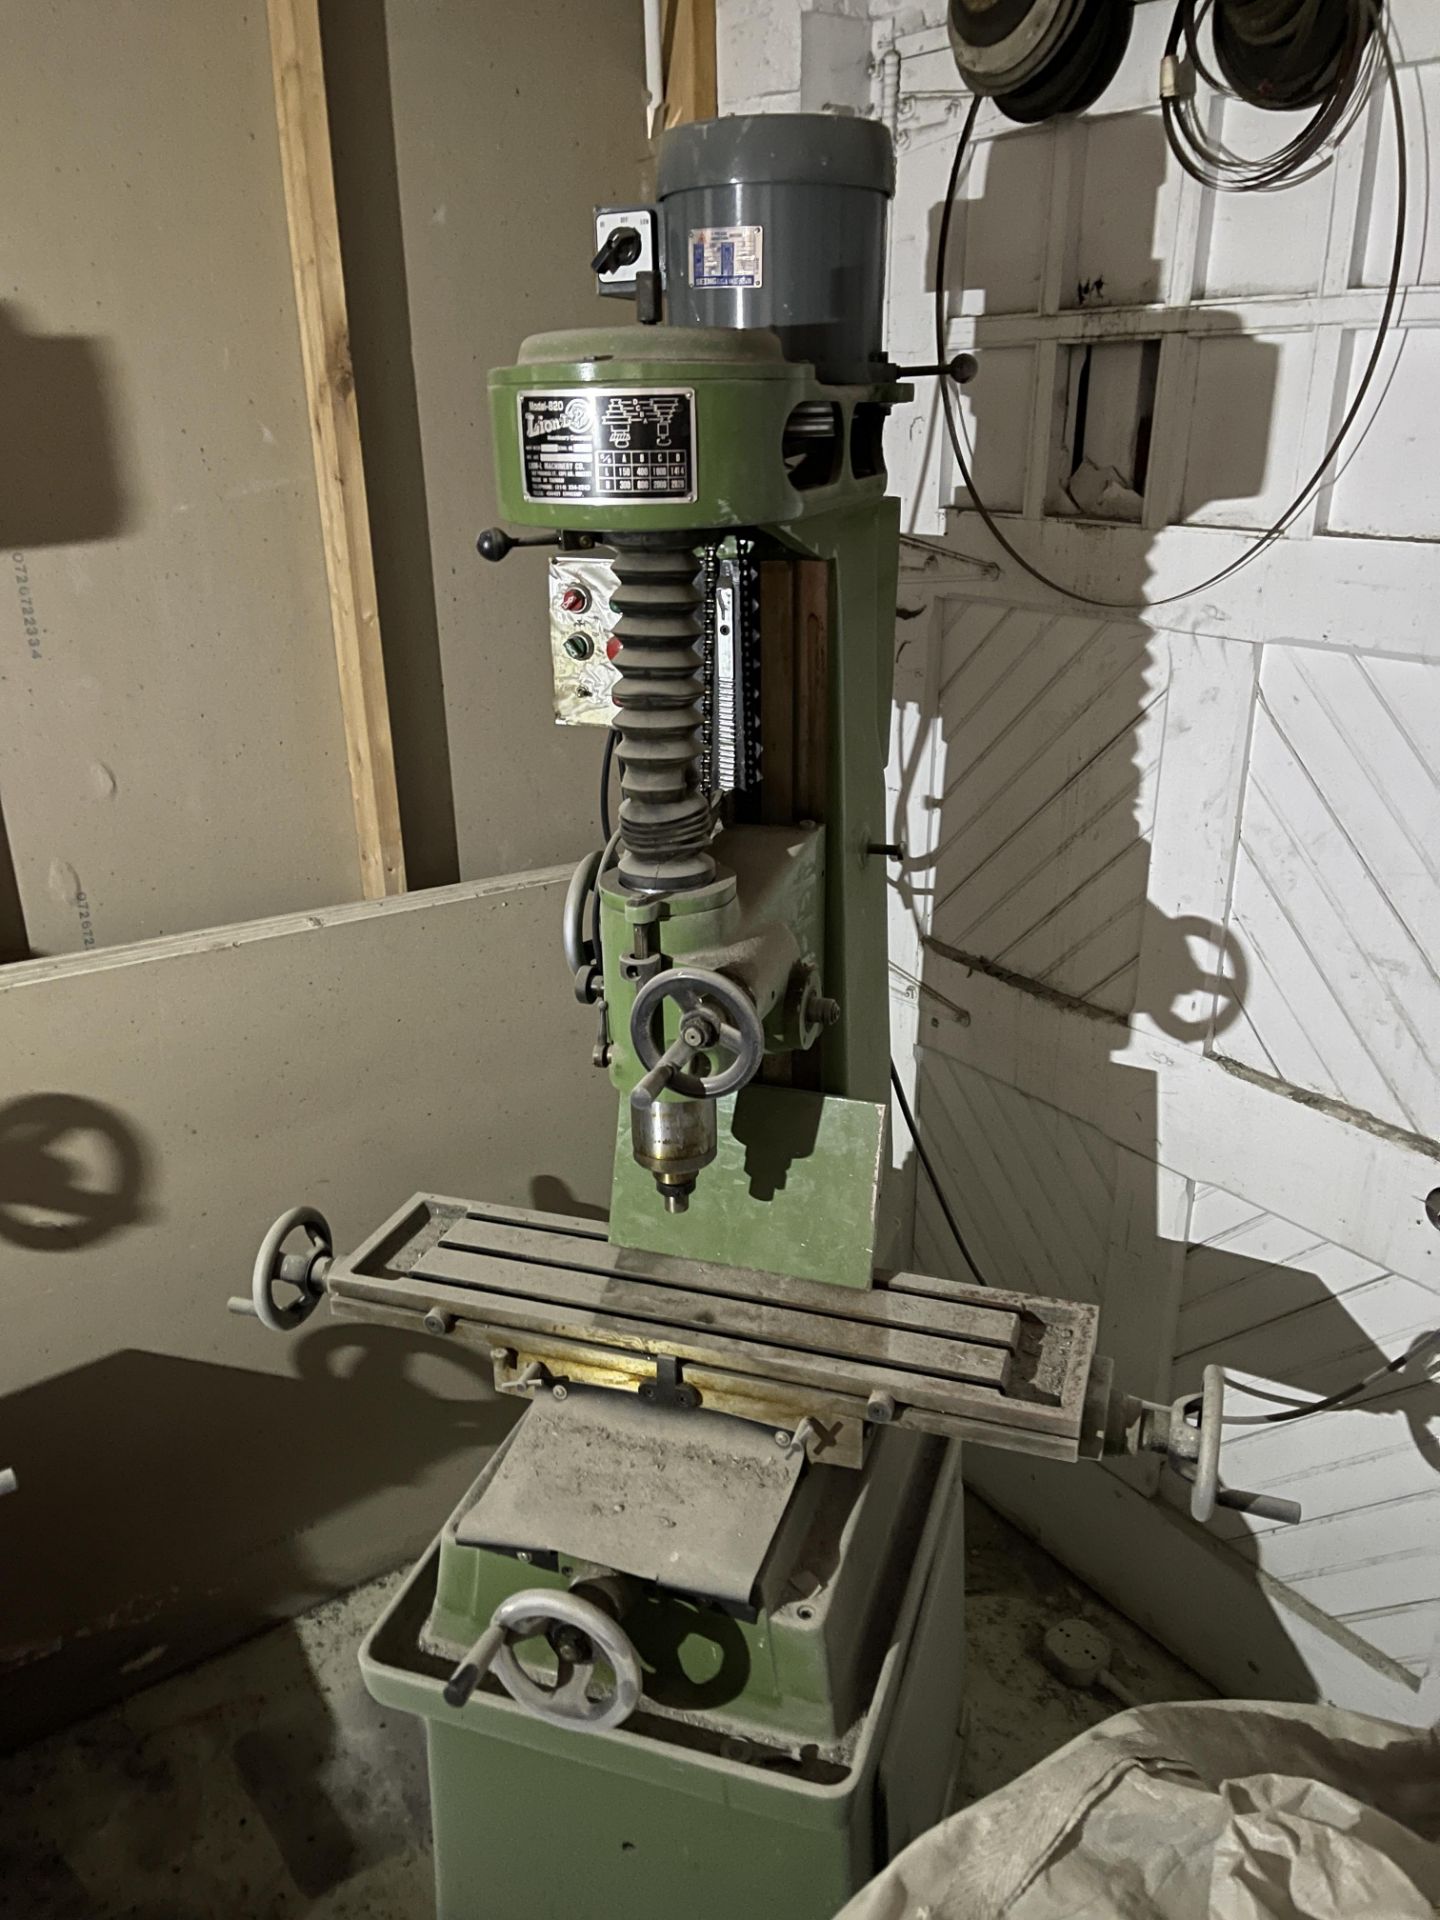 LION-L MODEL 820 COMMERCIAL DRILL PRESS - Image 2 of 4